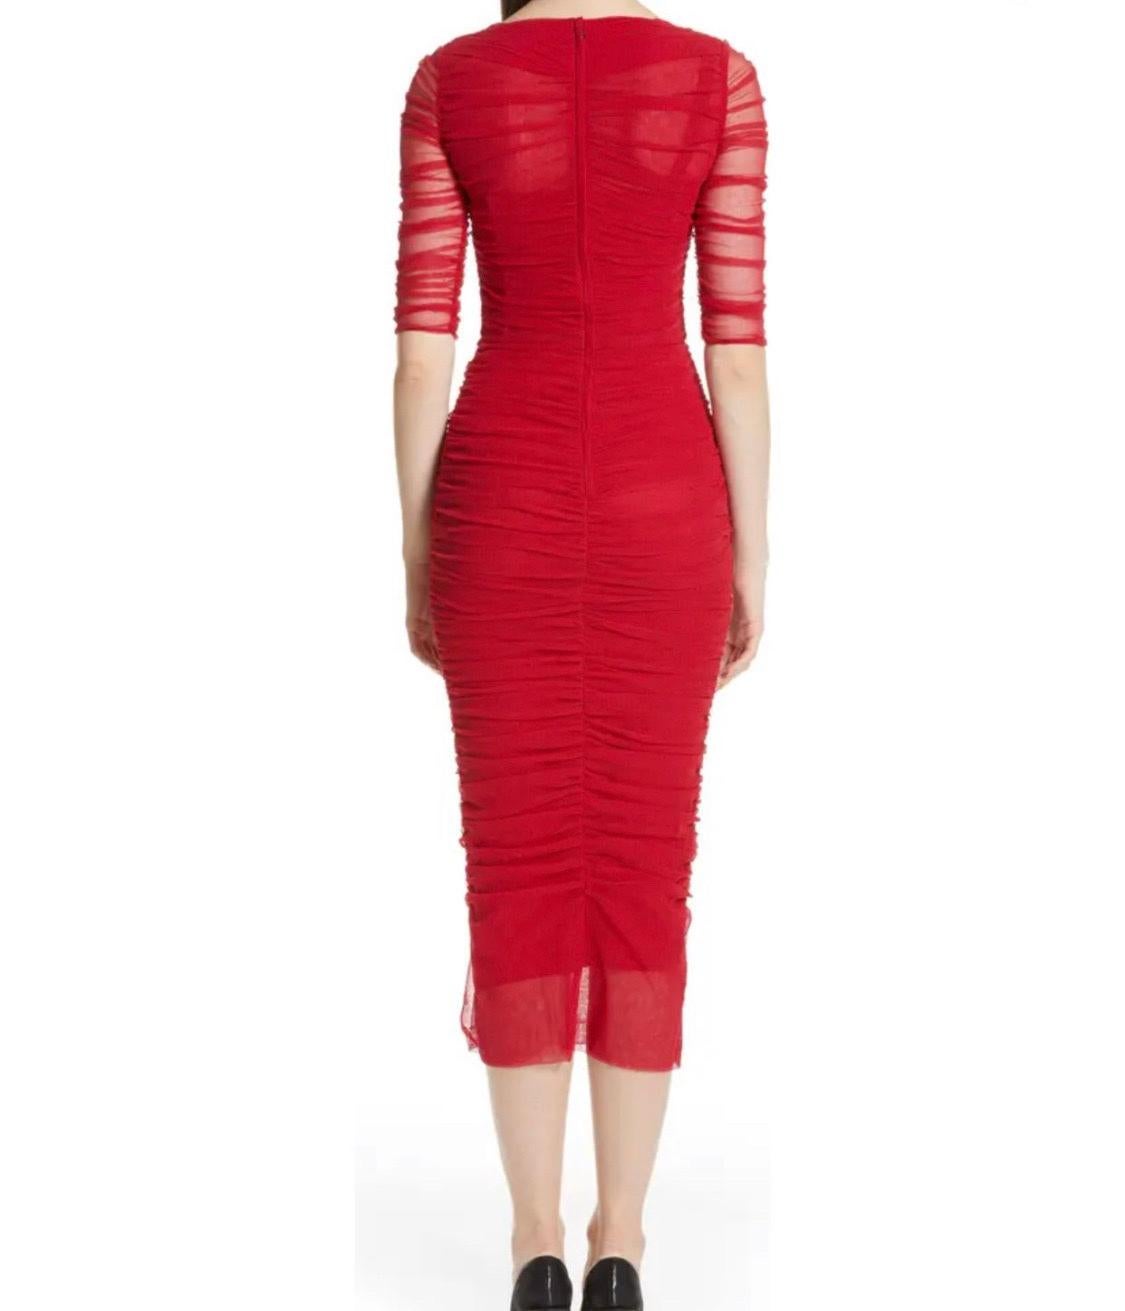 Women's Dolce & Gabbana red two-layered cotton and nylon dress with gathers 